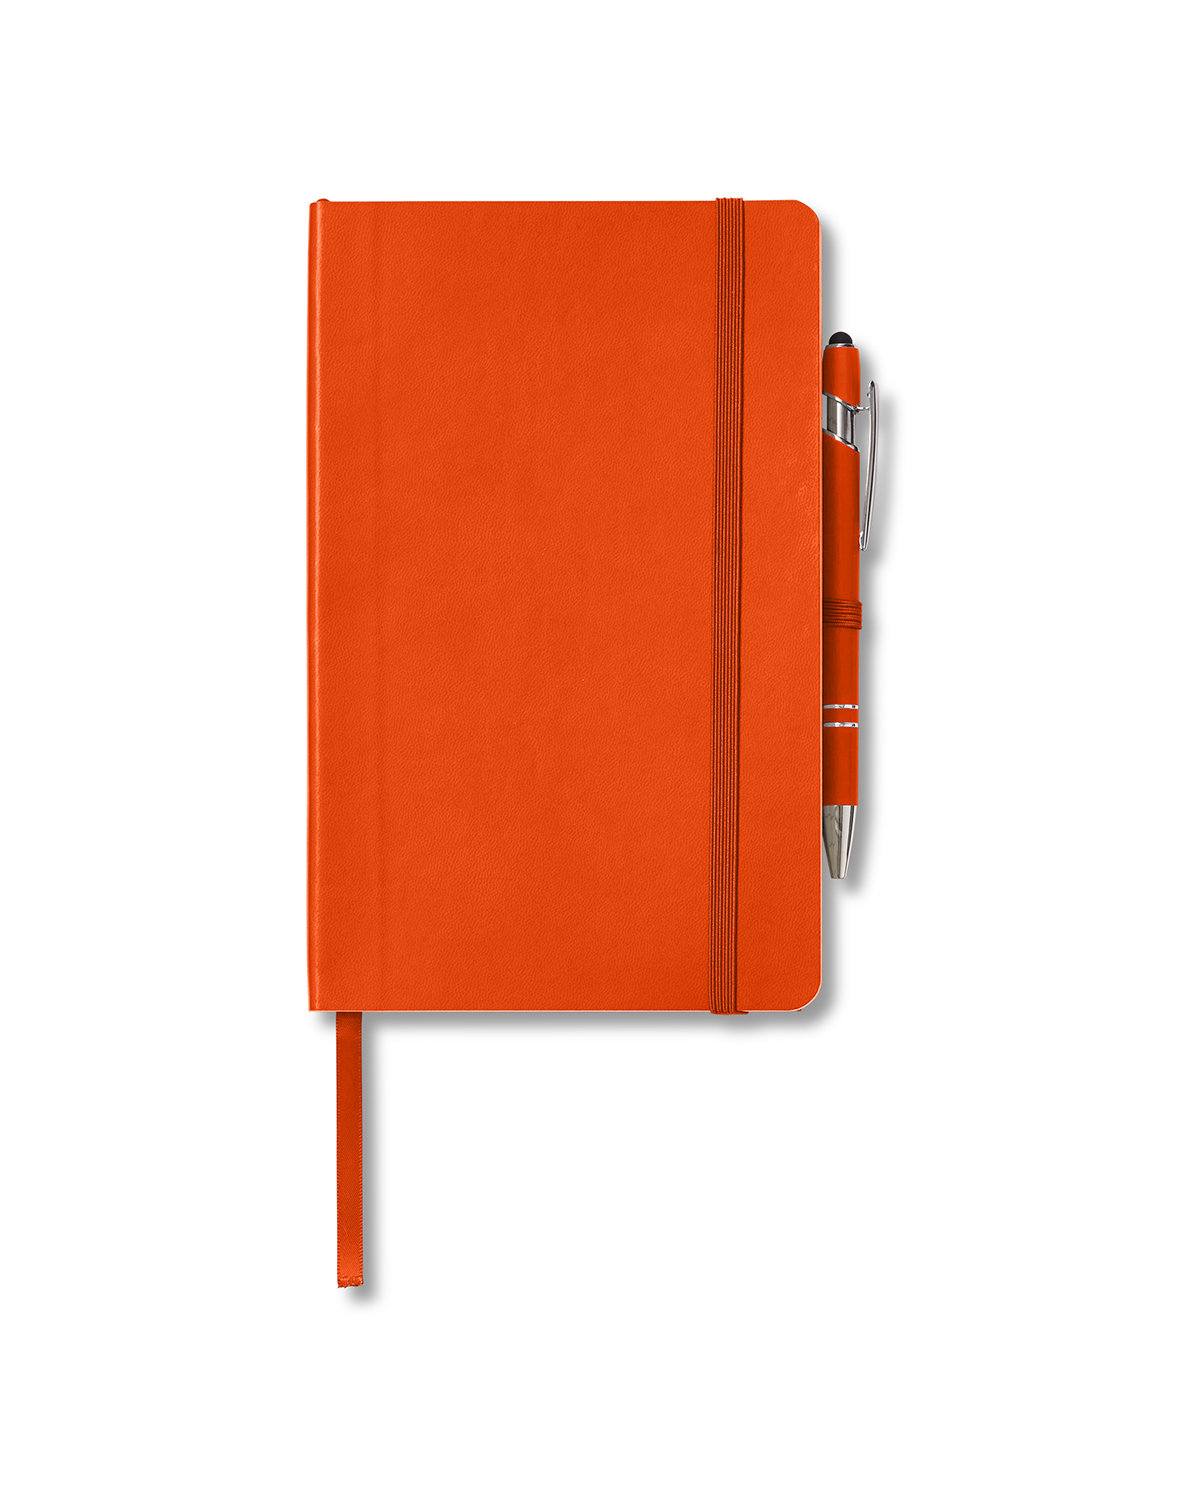 CORE365 Soft Cover Journal And Pen Set campus orange 